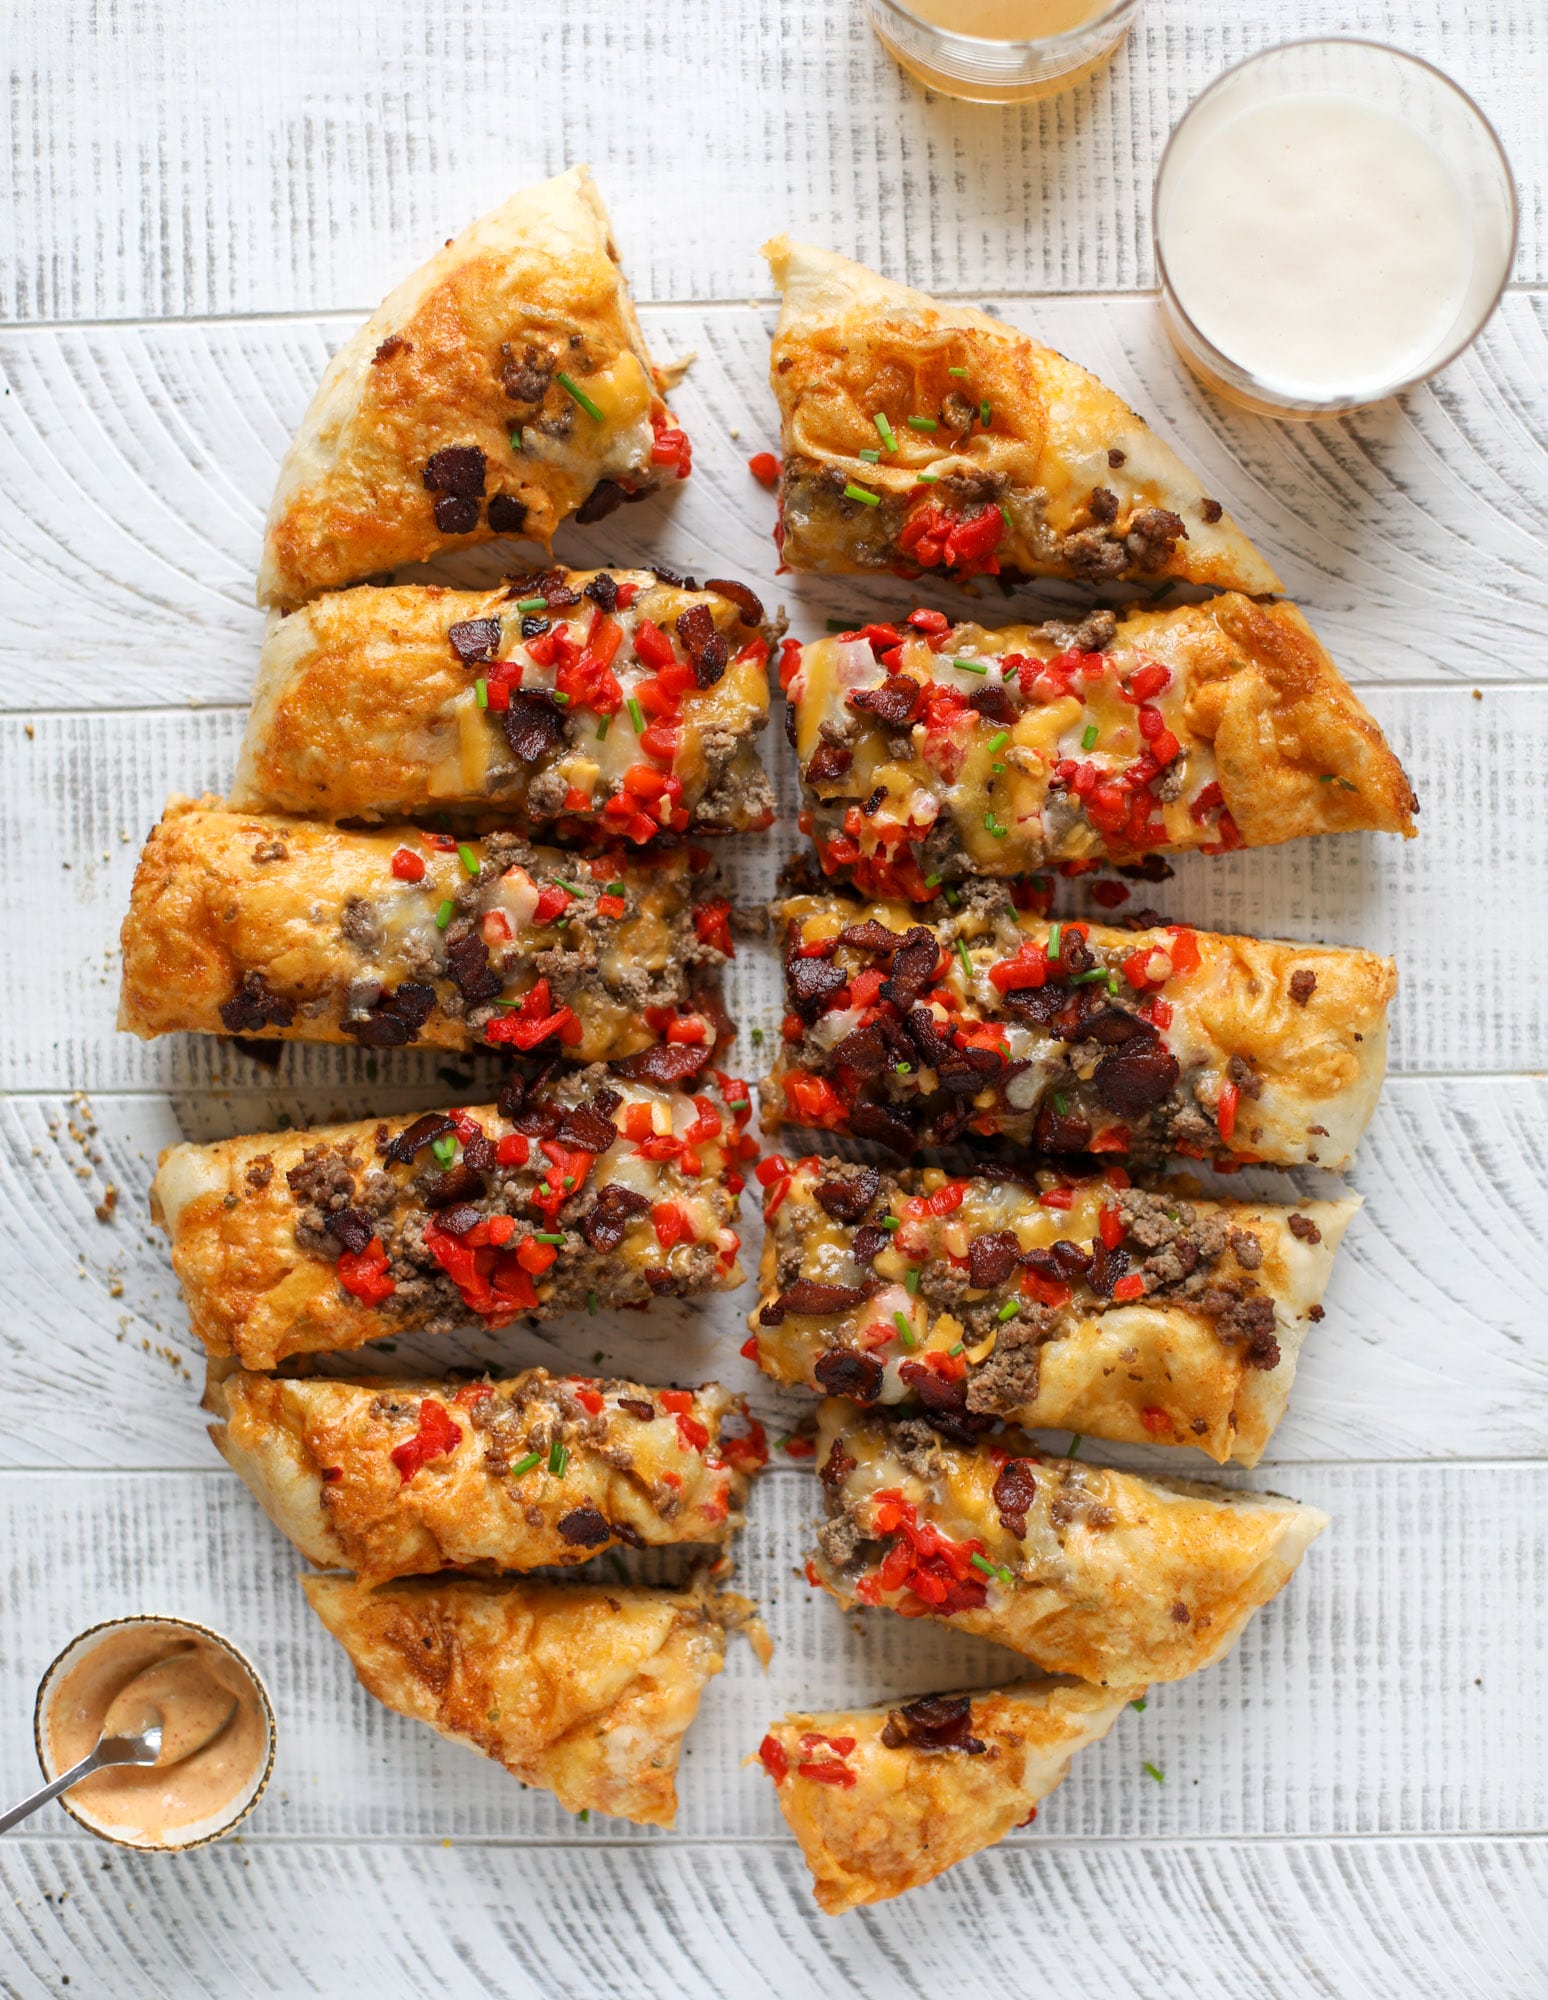 This grilled cheeseburger pizza is my take on the smoke shack burger! Cheddar, bacon, cherry peppers and special sauce make this impossible to resist.